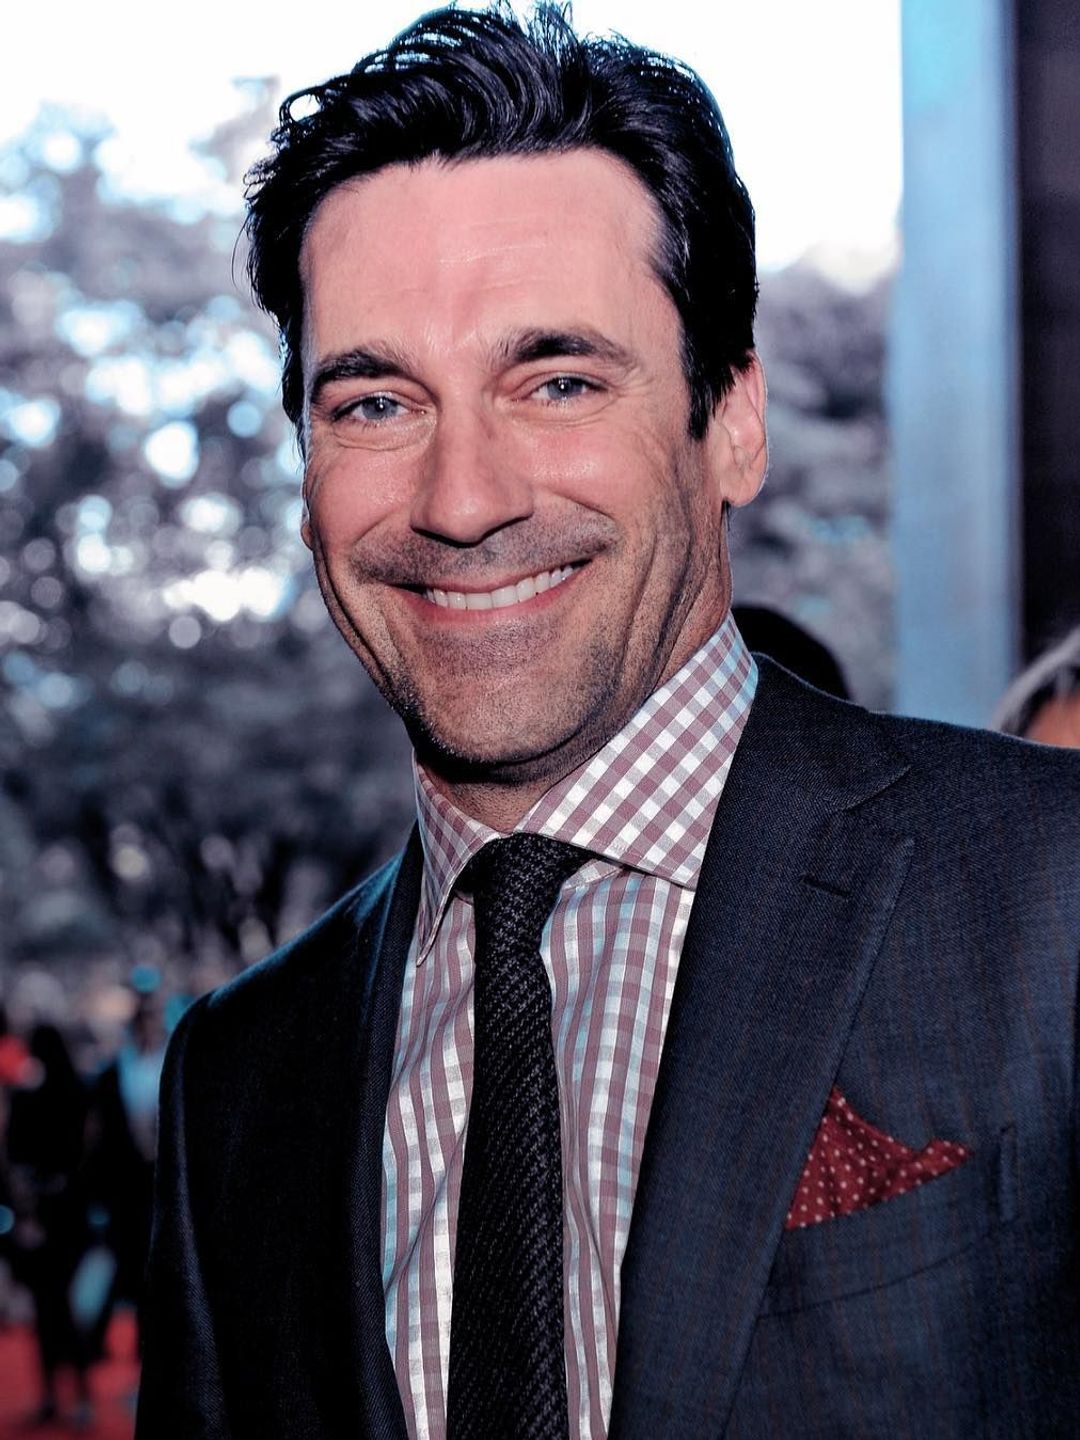 Jon Hamm how did he became famous